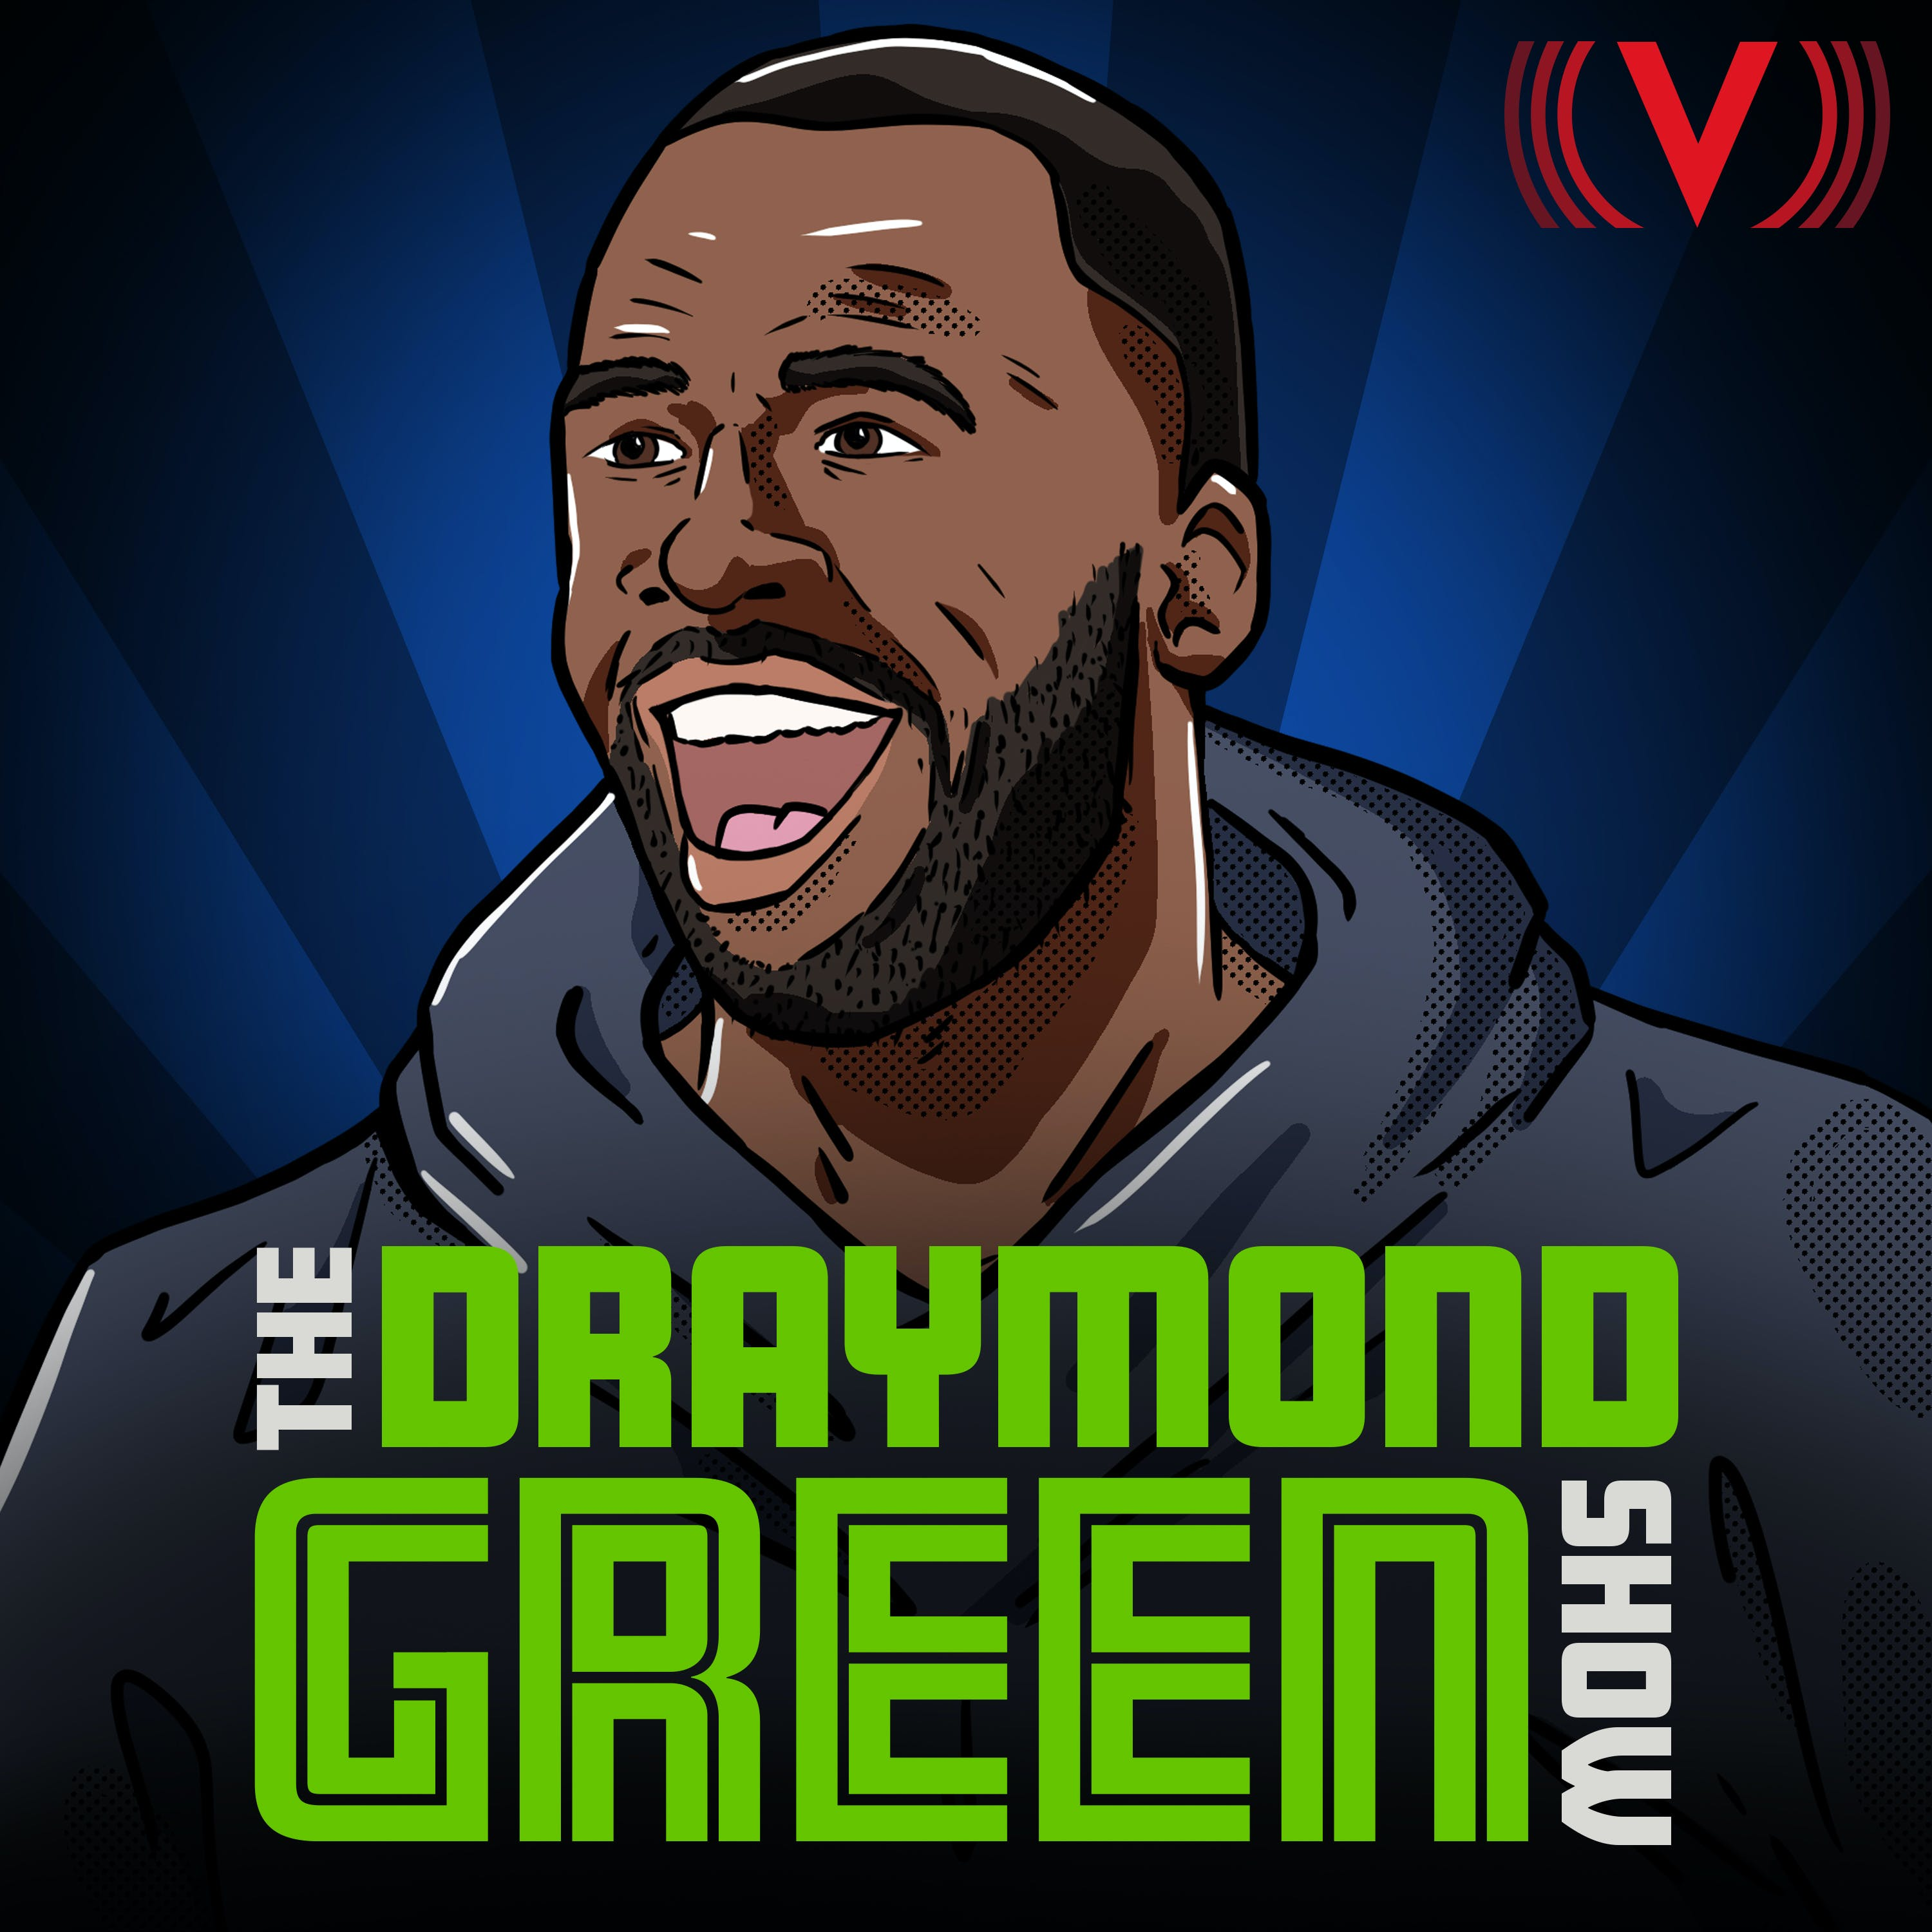 Dray's Return To Practice, Harden/Embiid + a Charles Barkley Interview